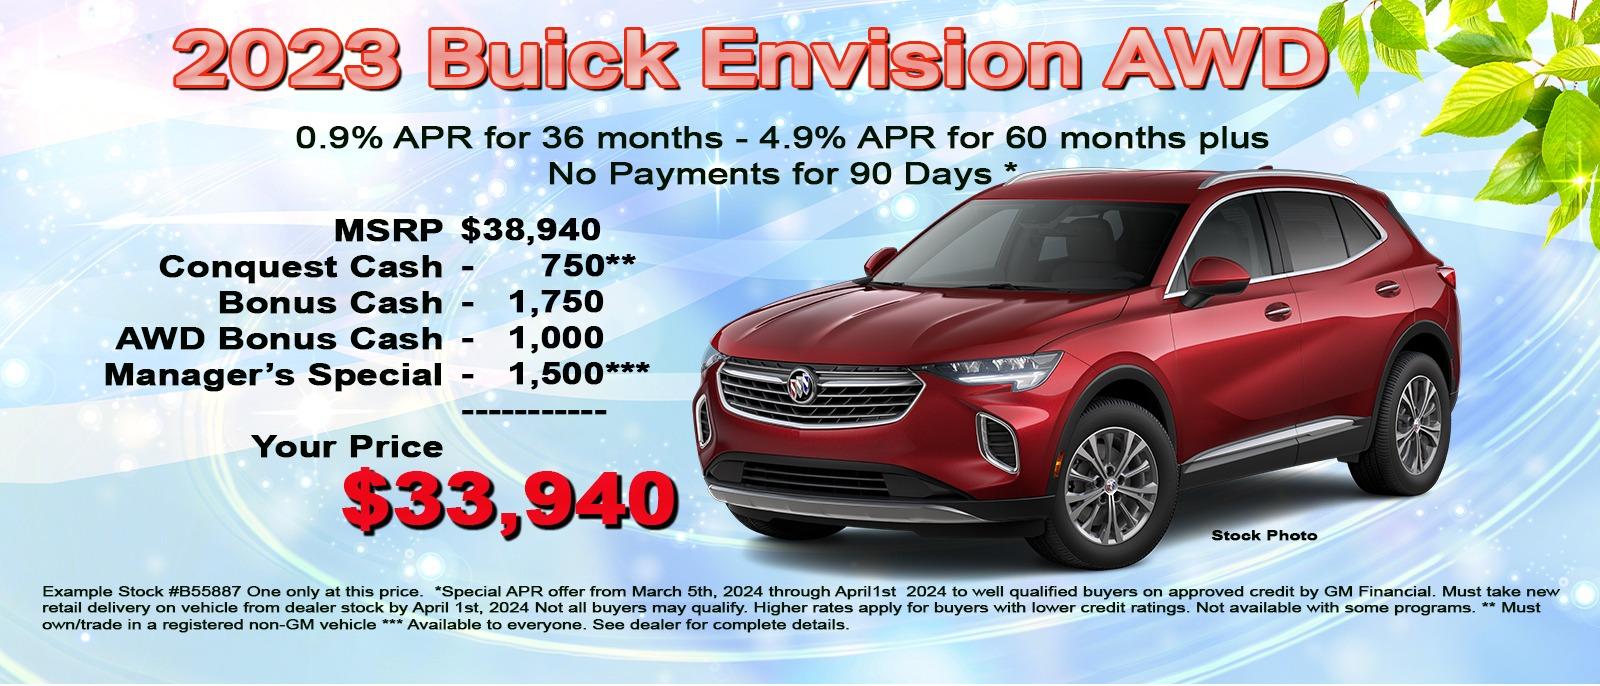 Save $5000 on your new Buick Envision now